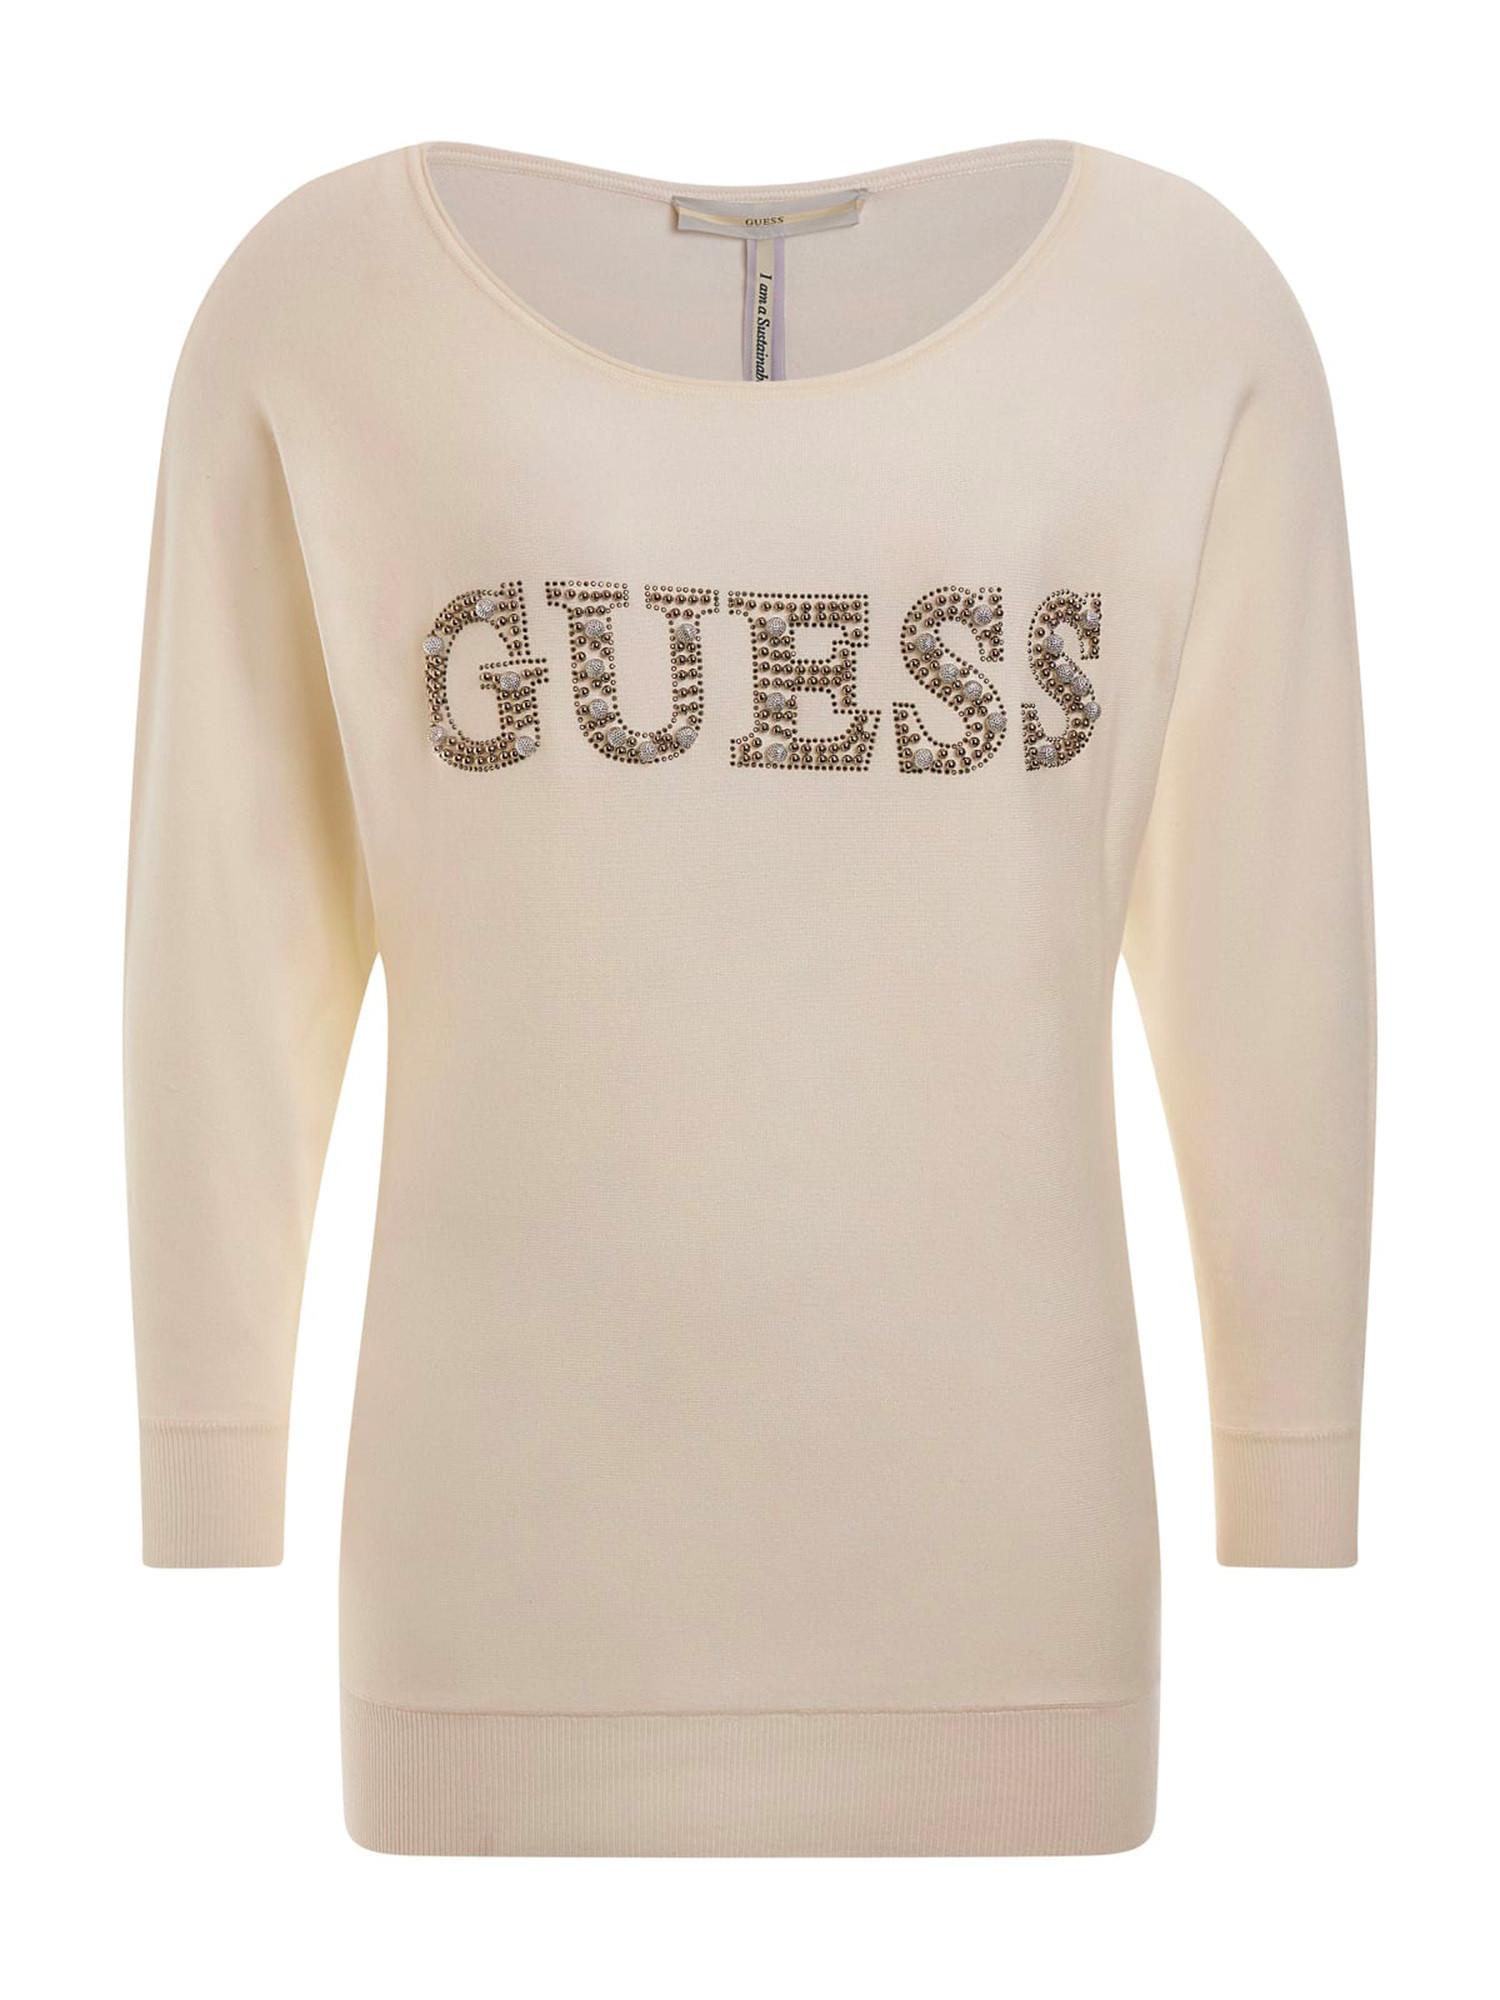 Guess - Regular fit sweater with logo with rhinestones, Cream, large image number 0